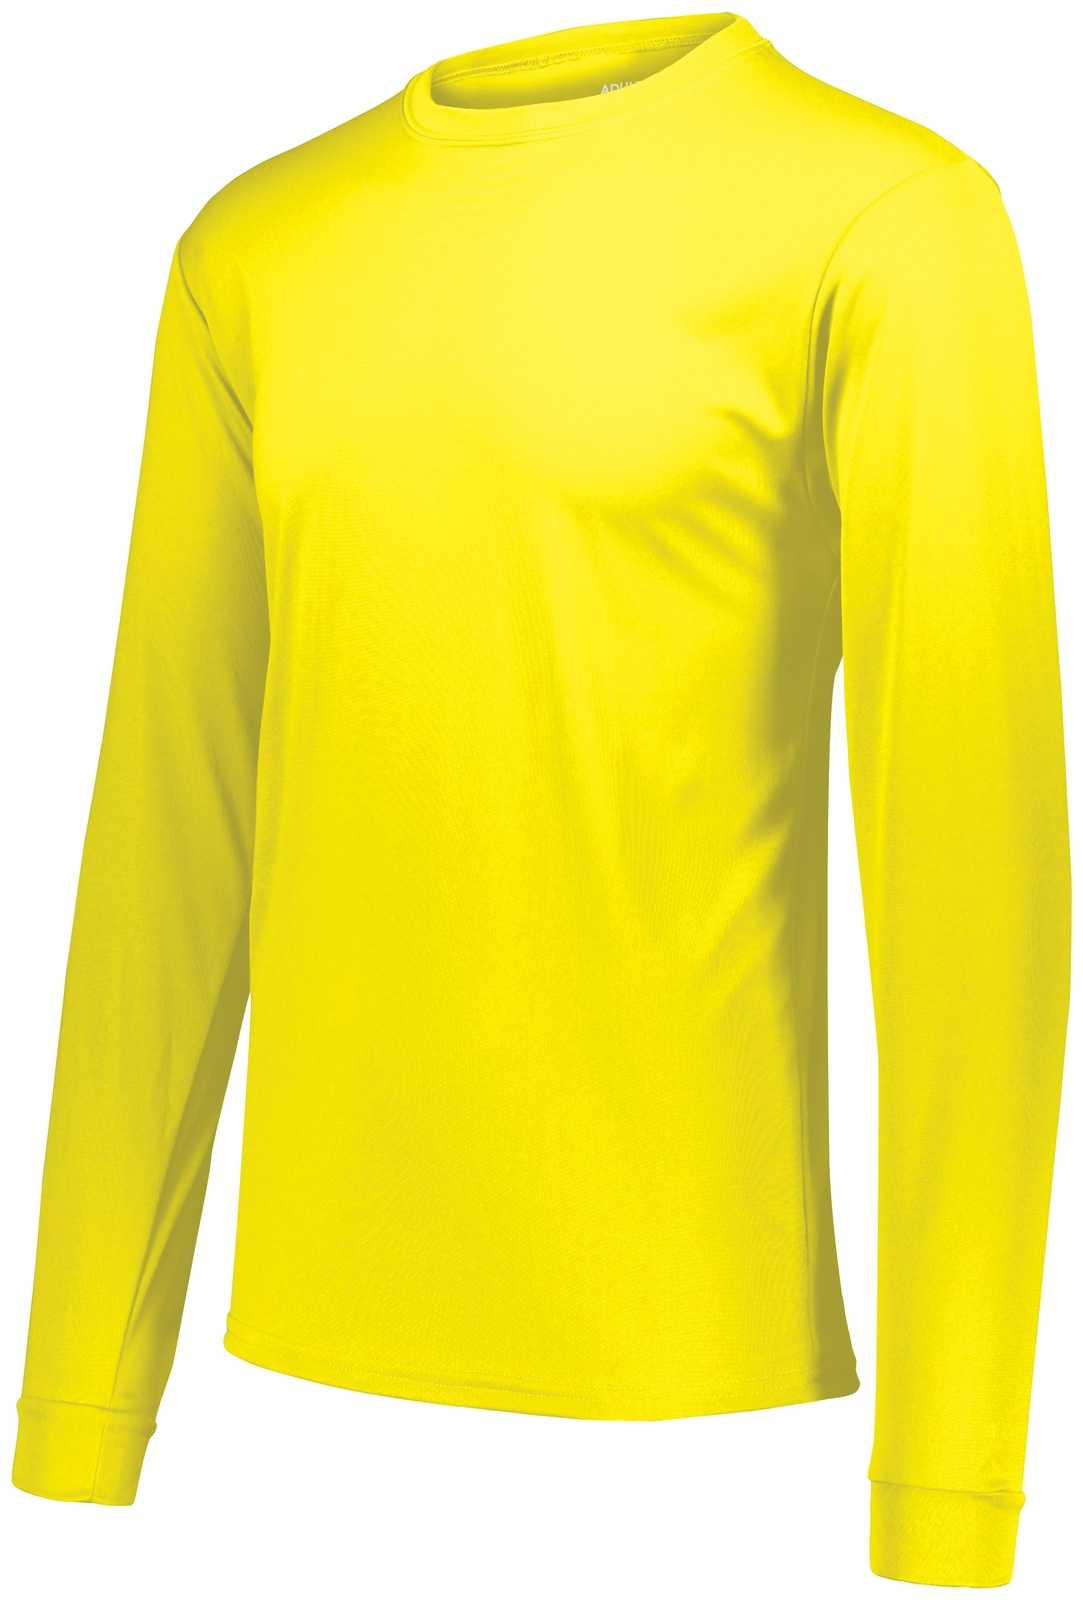 Augusta 788 NexGen Wicking Long Sleeve Tee - Safety Yellow - HIT a Double